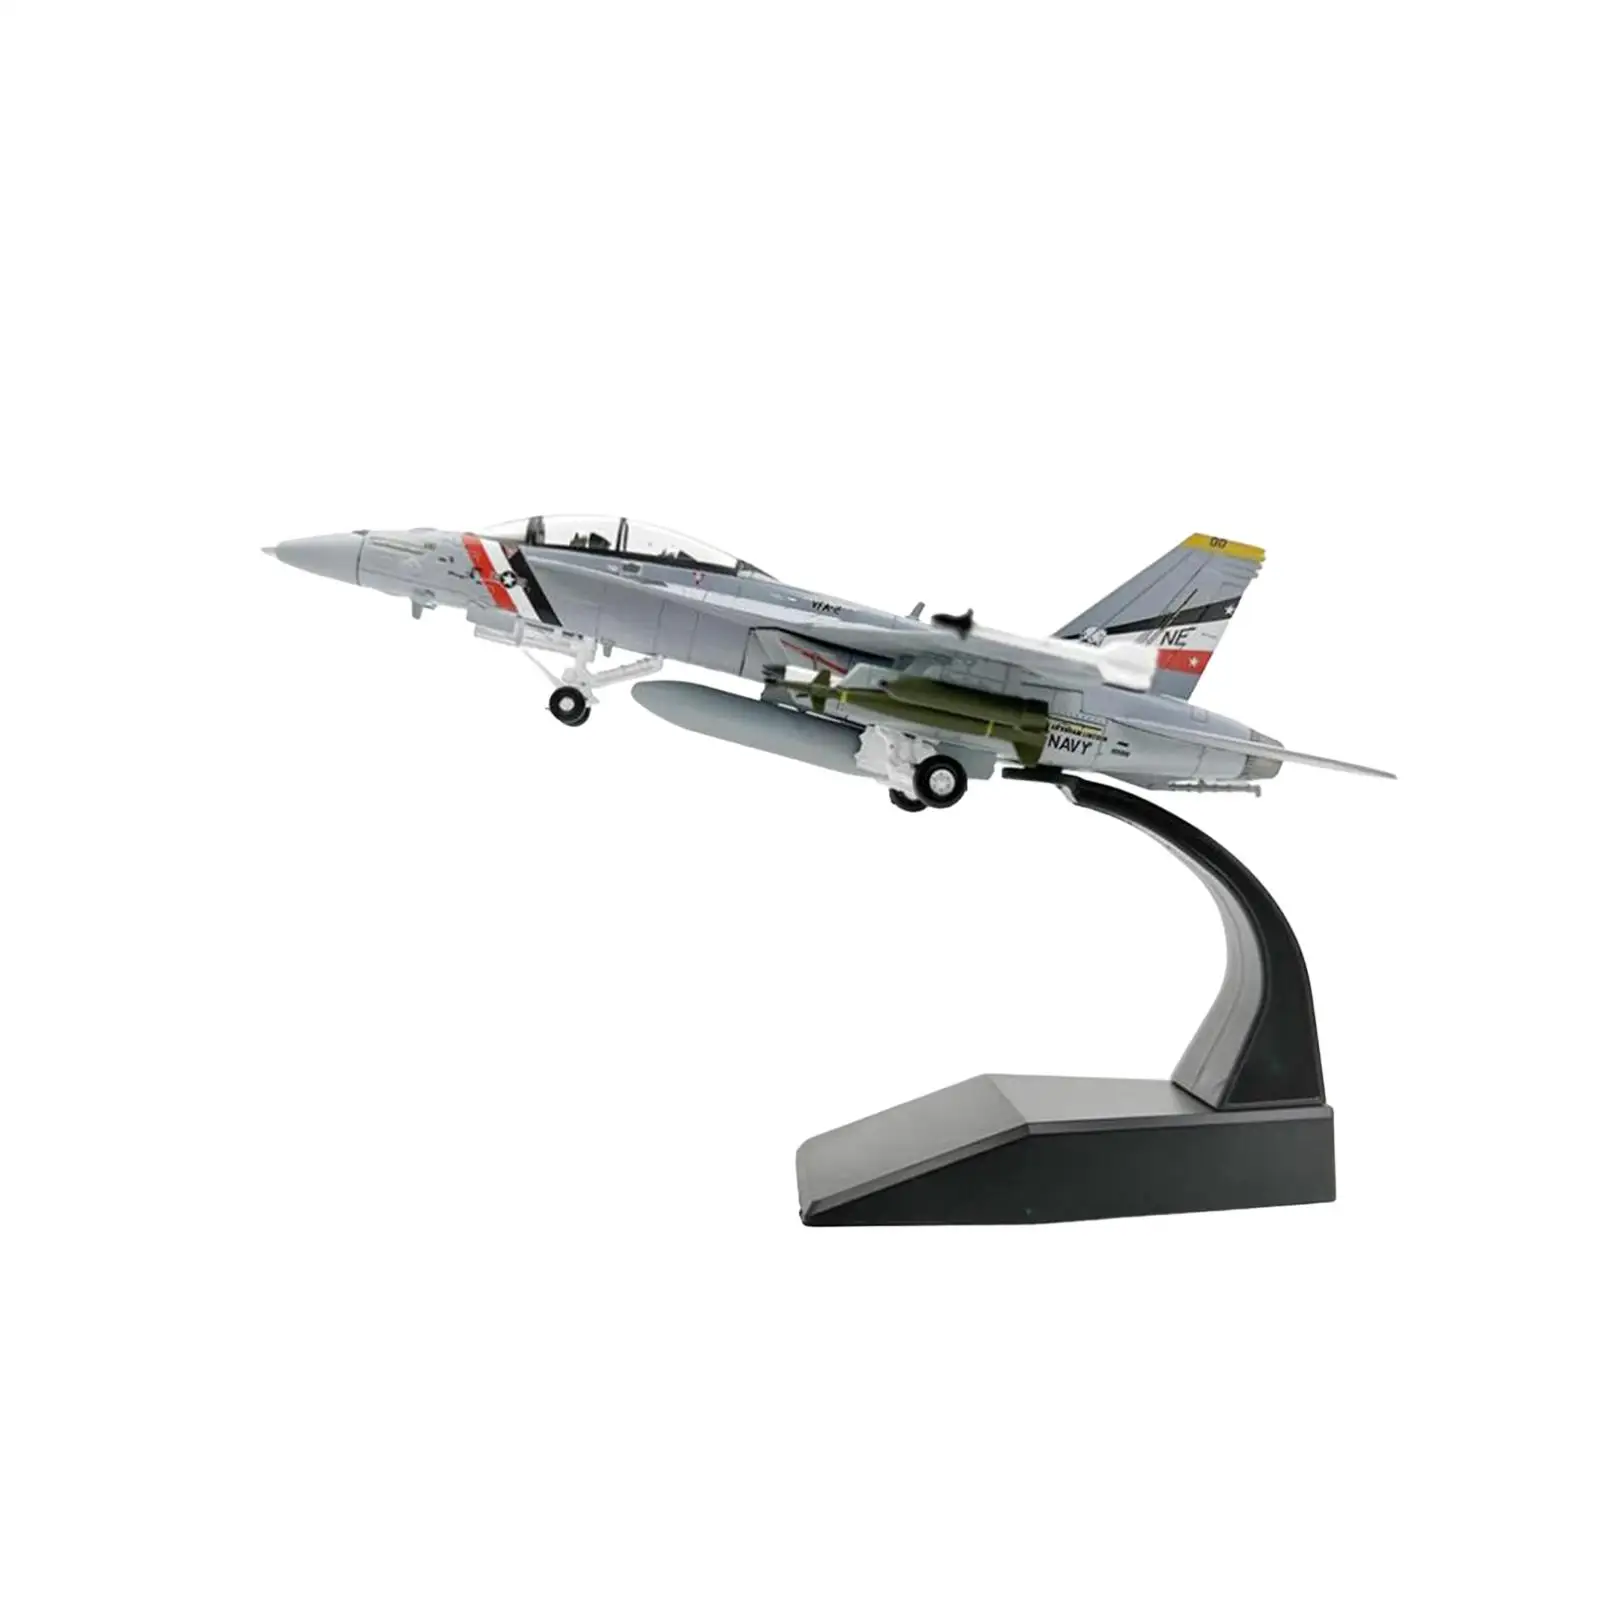 1/100 Scale Jet Aircraft Adults Gifts Diecast Alloy Model Airplane for Cafes Home Shelf TV Cabinet Aviation Commemorate